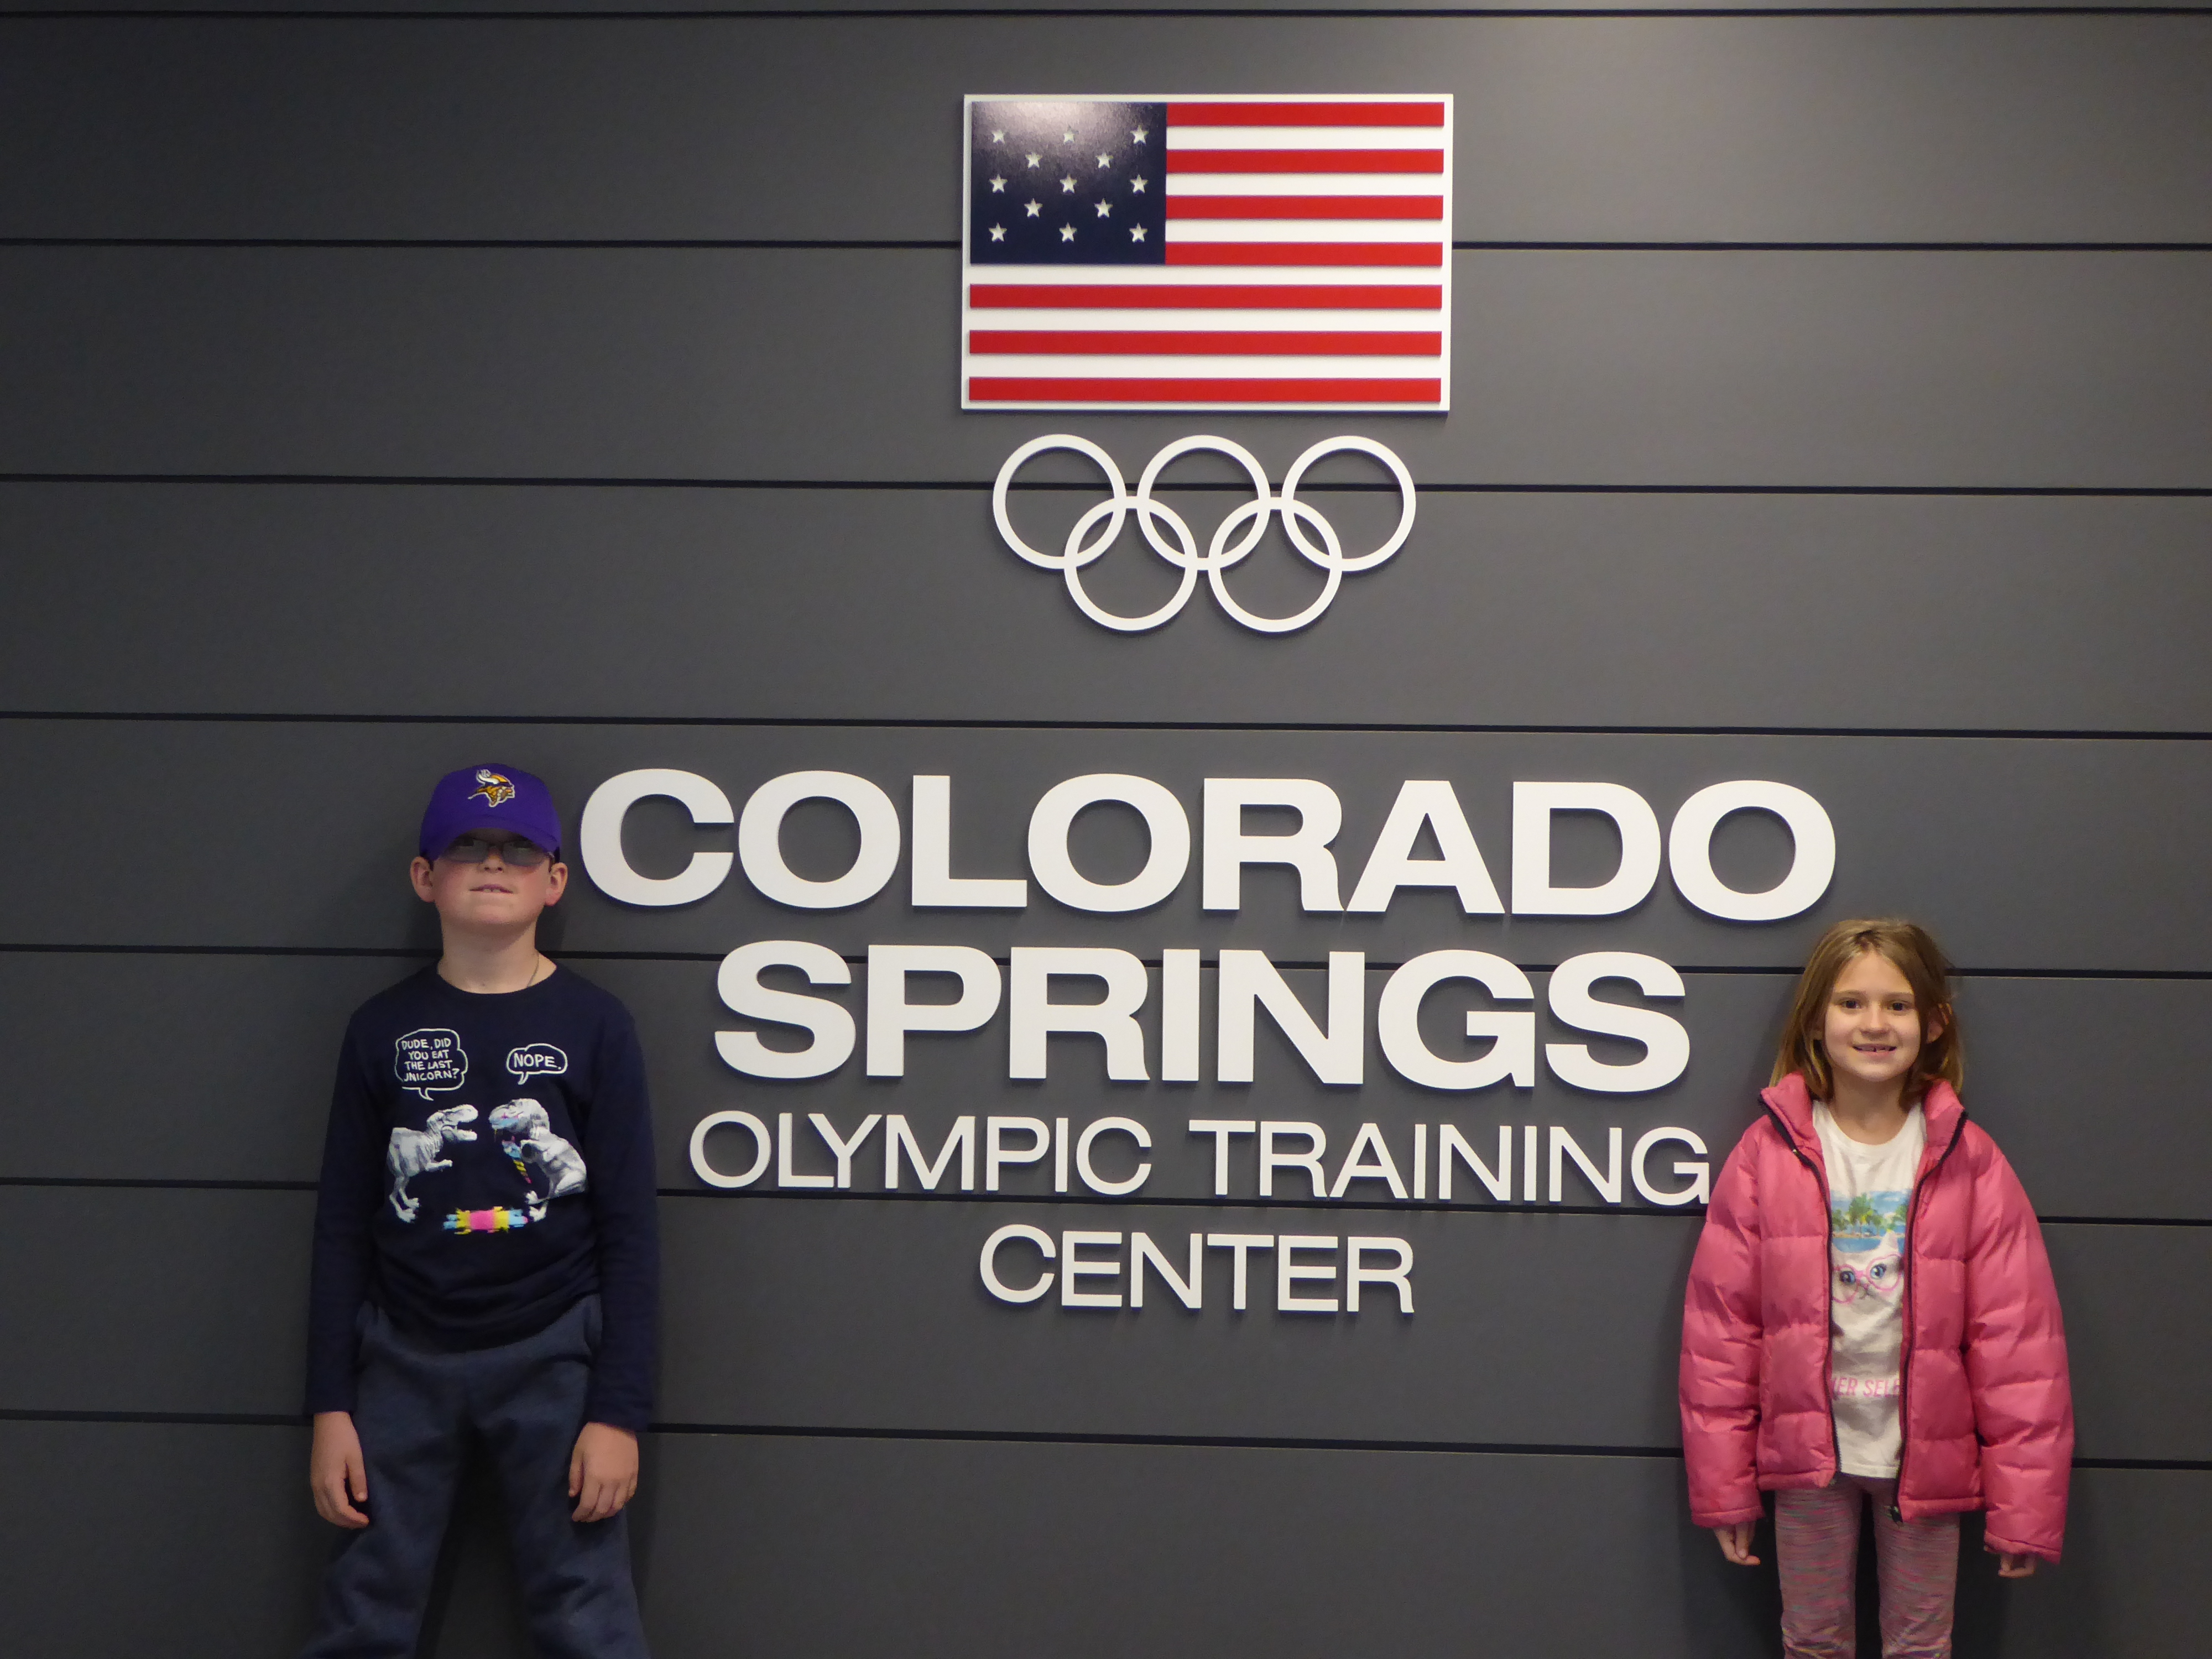 Get the Gold Medal Treatment at the U.S. Olympic Training Center in Colorado Springs